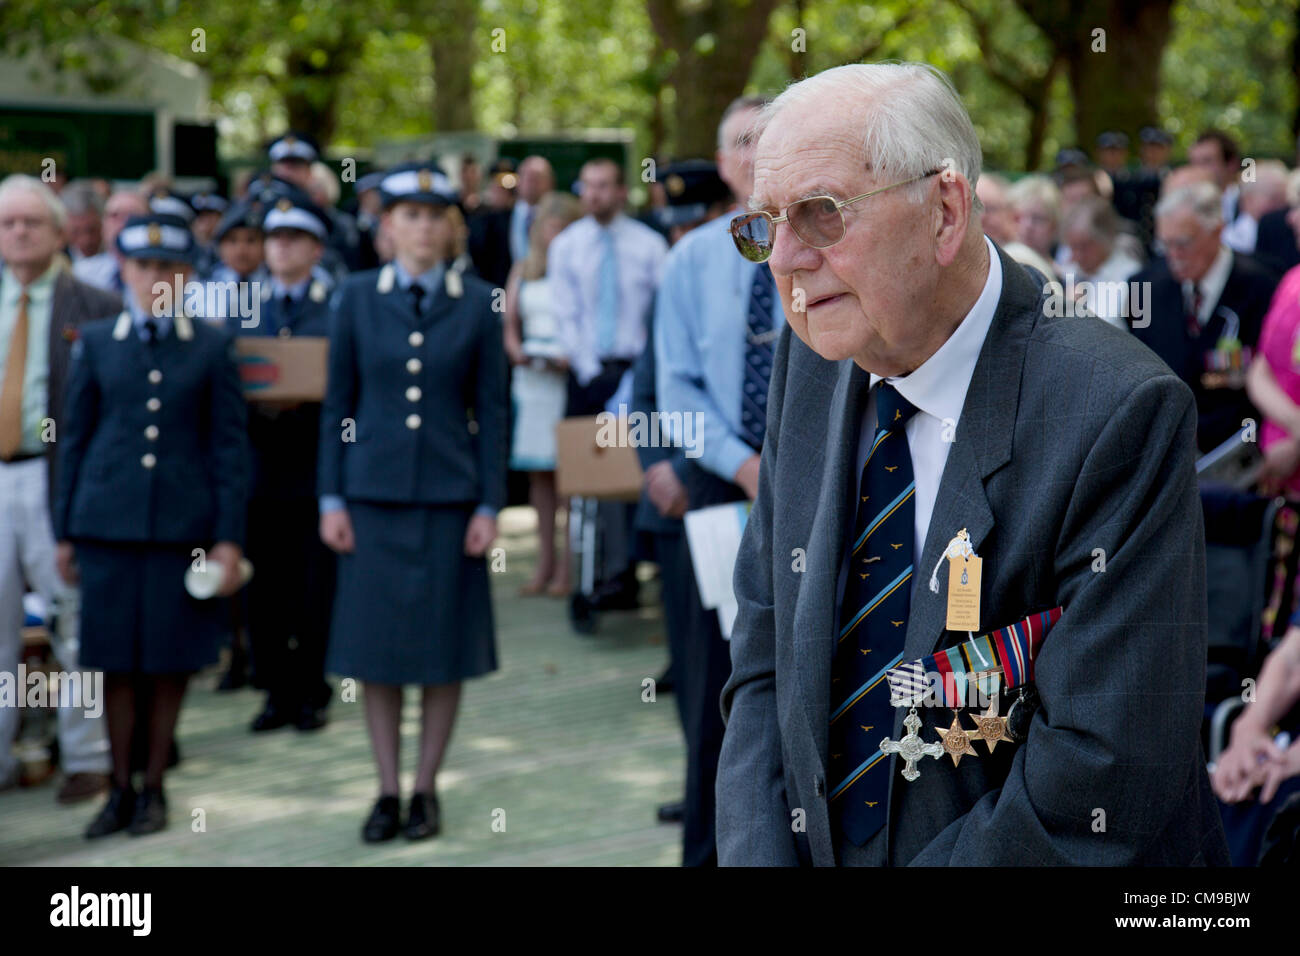 London, UK. 28/06/2012. Veterans and their families gather in Green park for a service to watch as the memorial to the 55,573 airmen of Bomber Command who died during World War II was unveiled. Some 6000 attended the ceremony.  Stock Photo